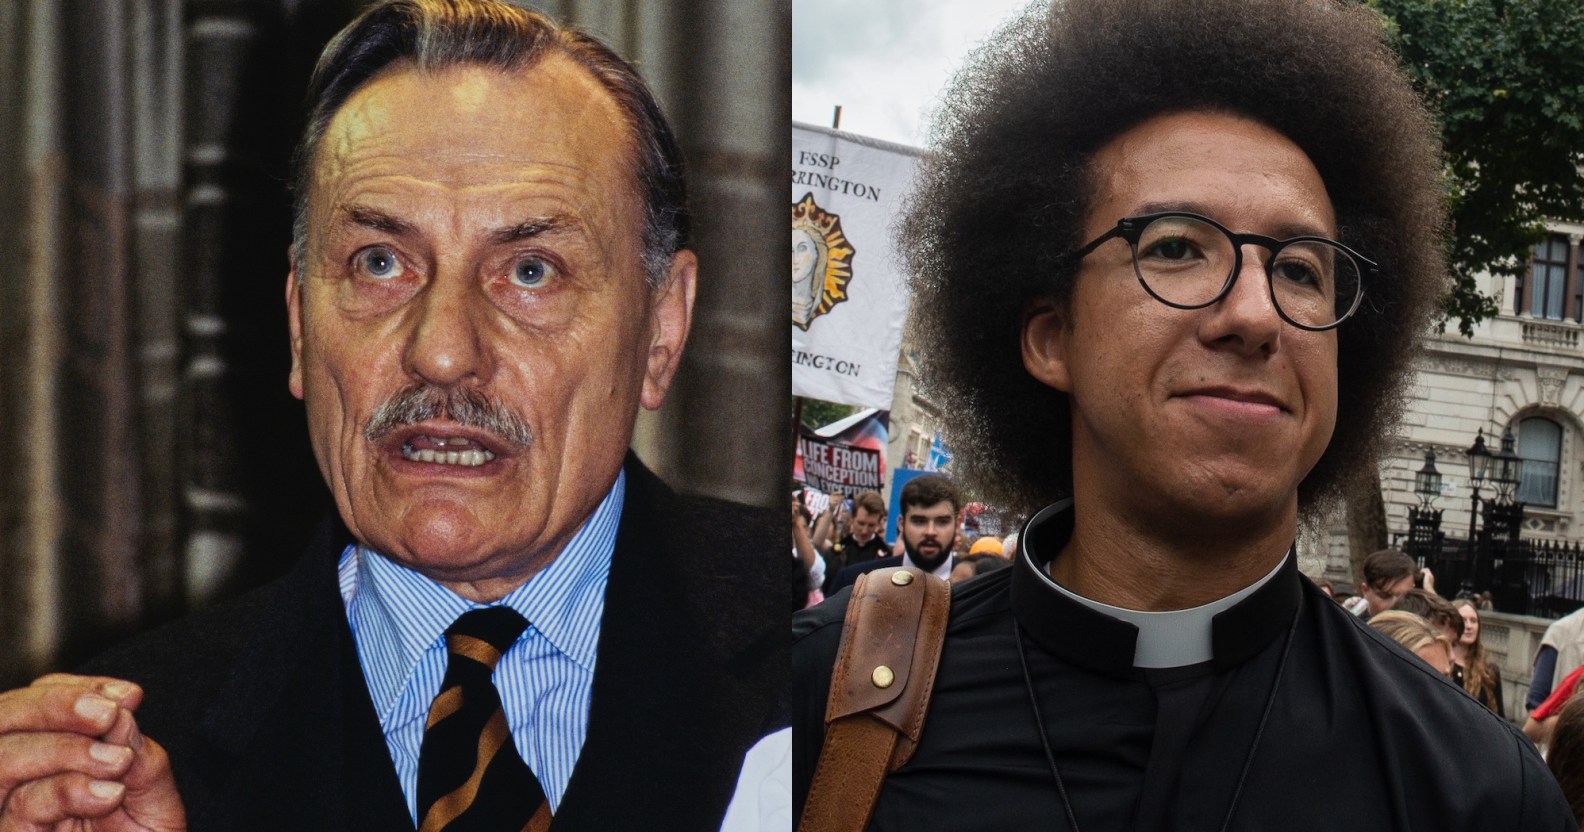 side-by-side photos of Enoch Powell at the 1980 Conservative Party Conference and GBNews presenter Calvin Robinson at an anti-abortion march